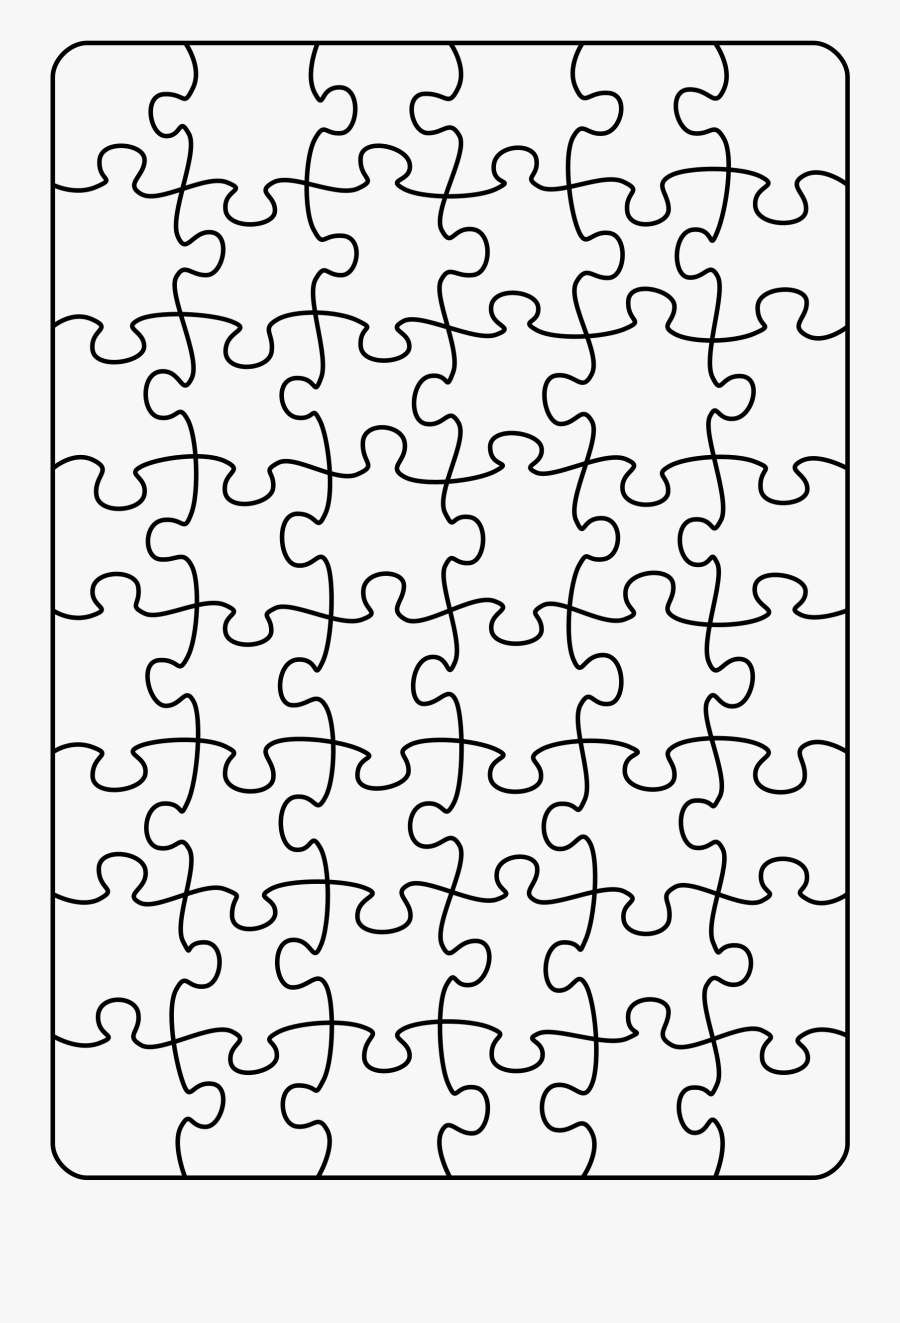 Jigsaw Puzzle Free Download Png - Jigsaw Puzzle Png, Transparent Clipart